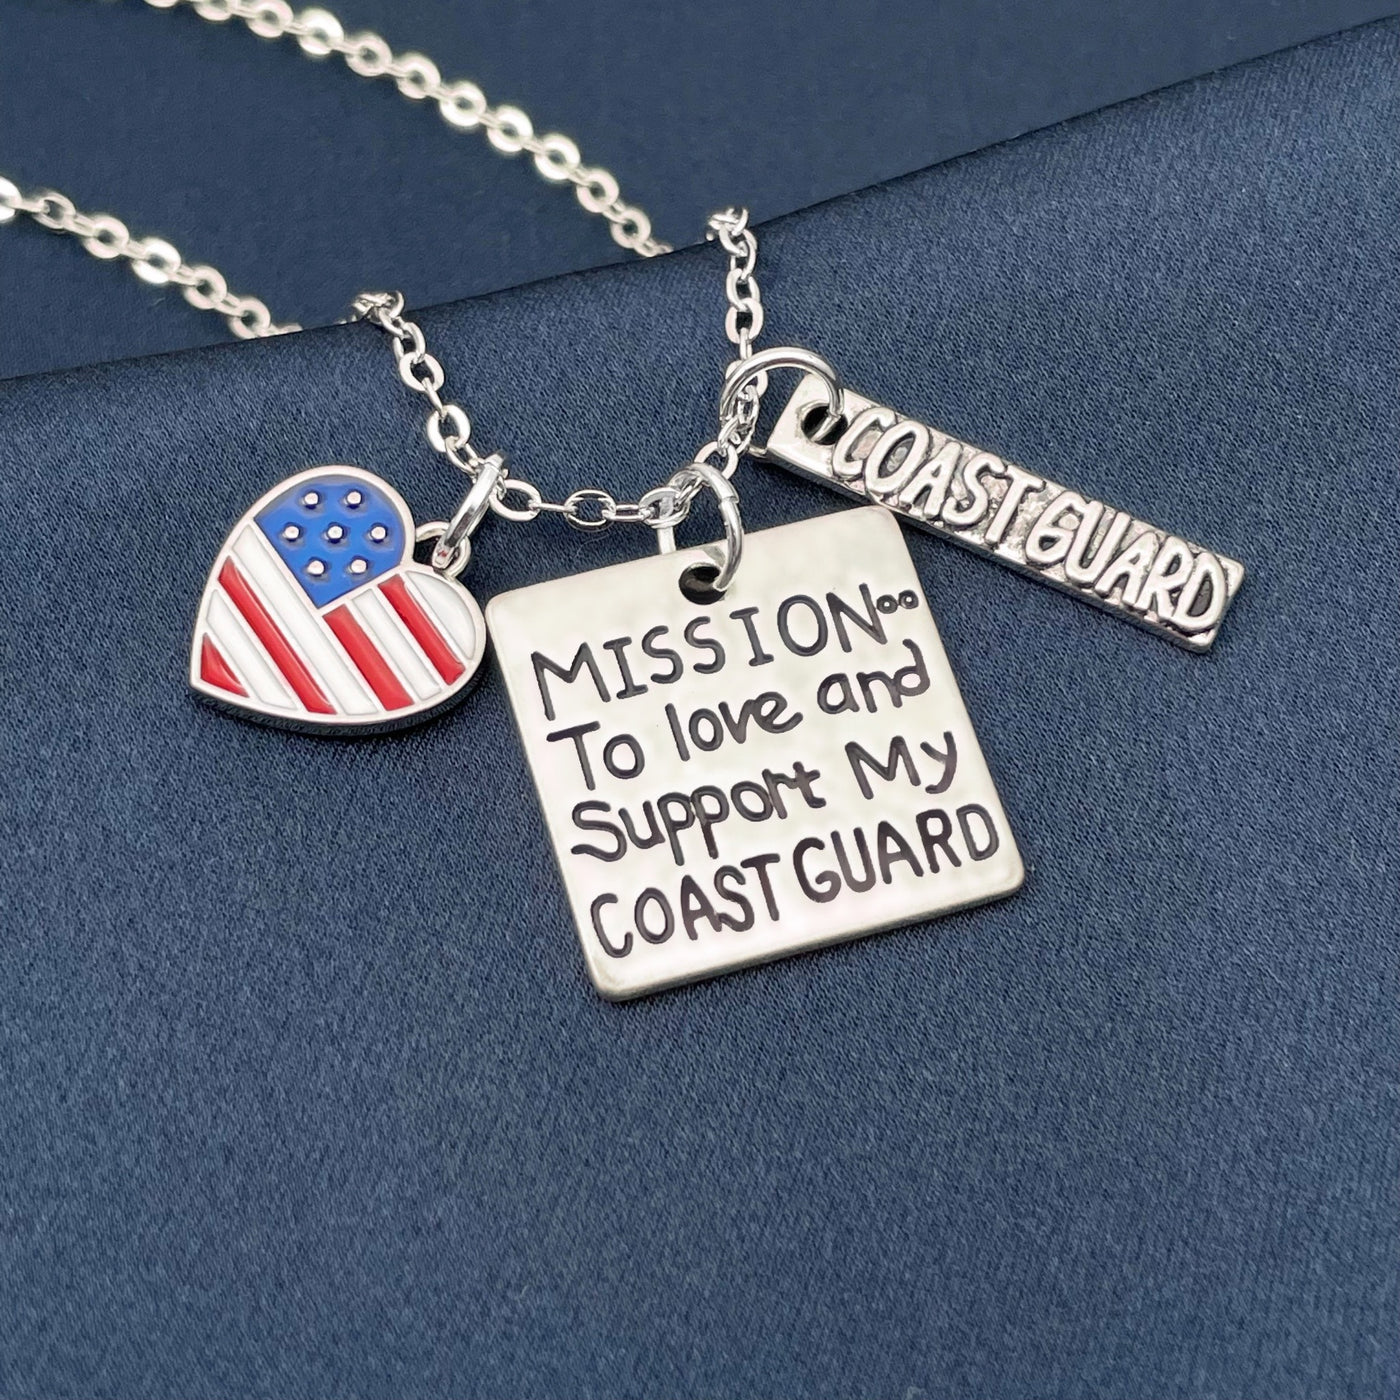 Love and Support My Coast Guard Necklace